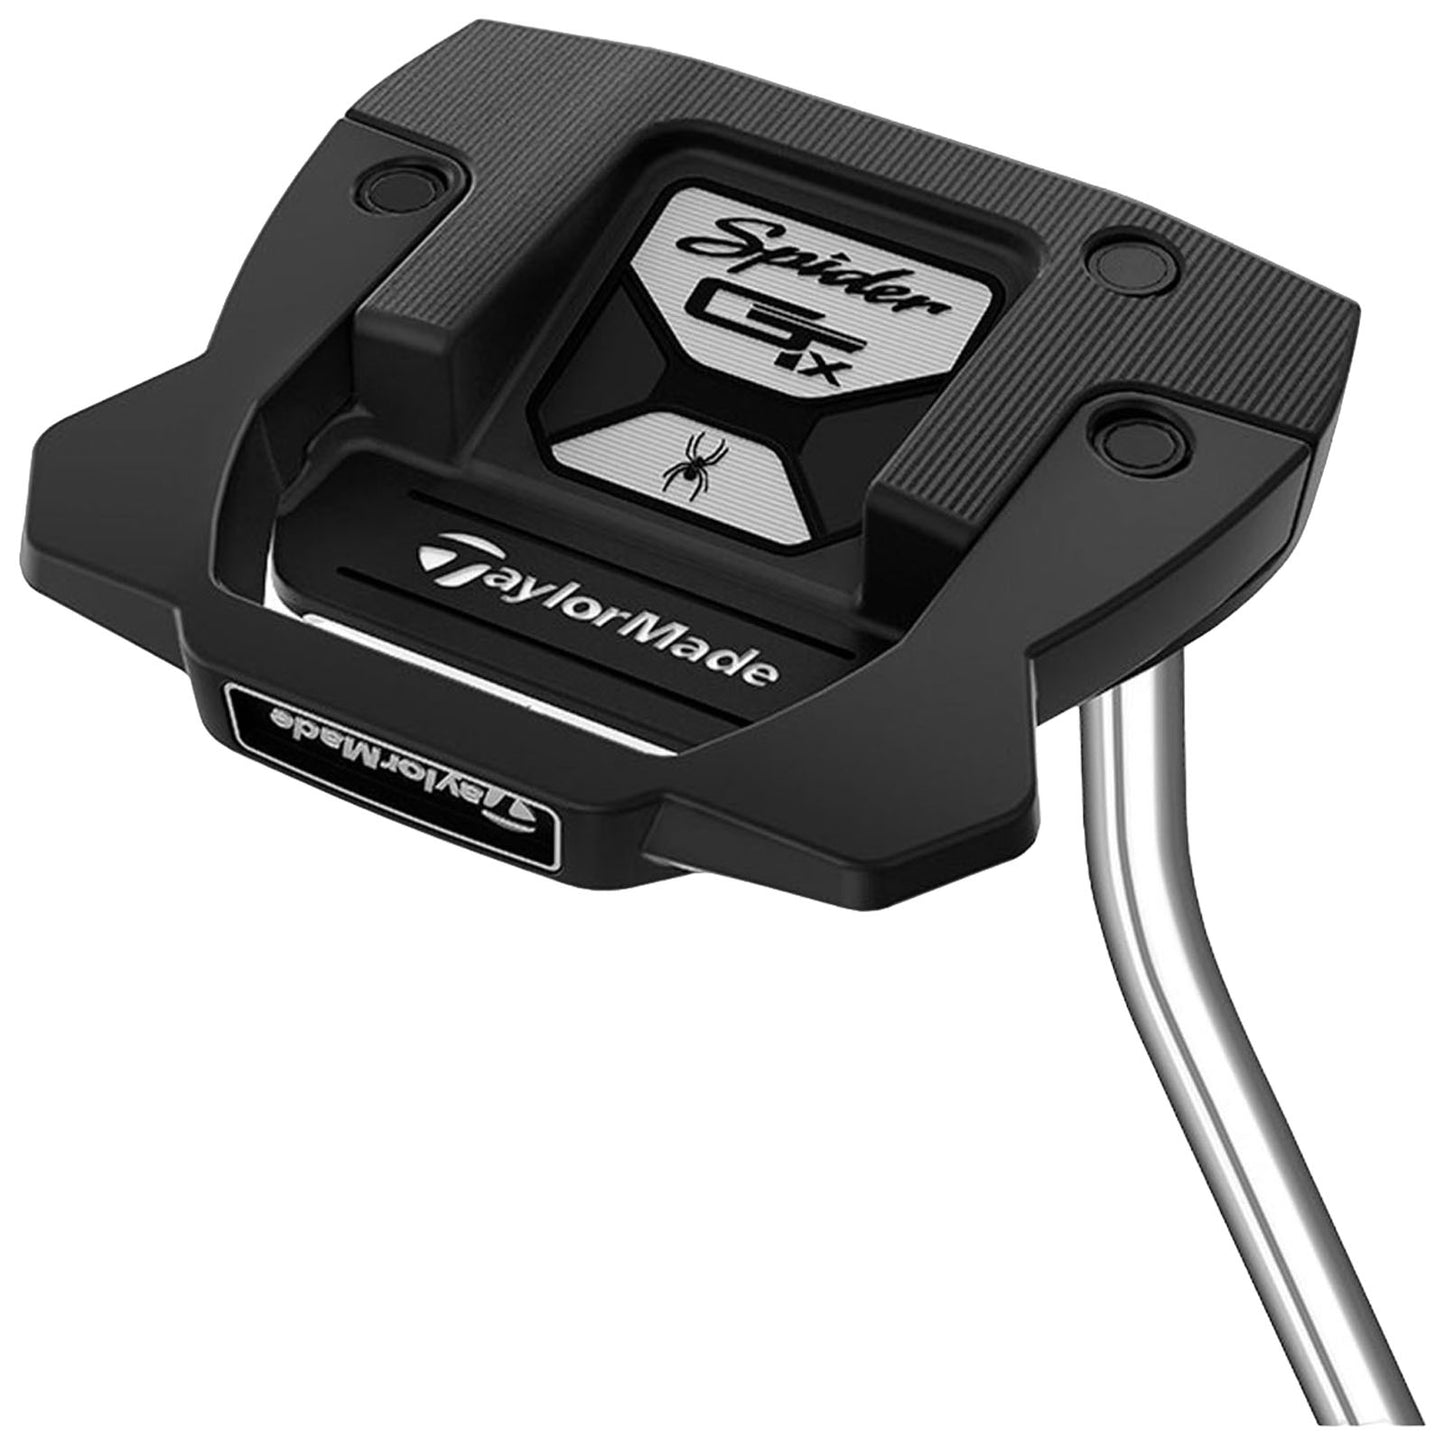 LEFT Handed TaylorMade Mens Spider GTX Putters